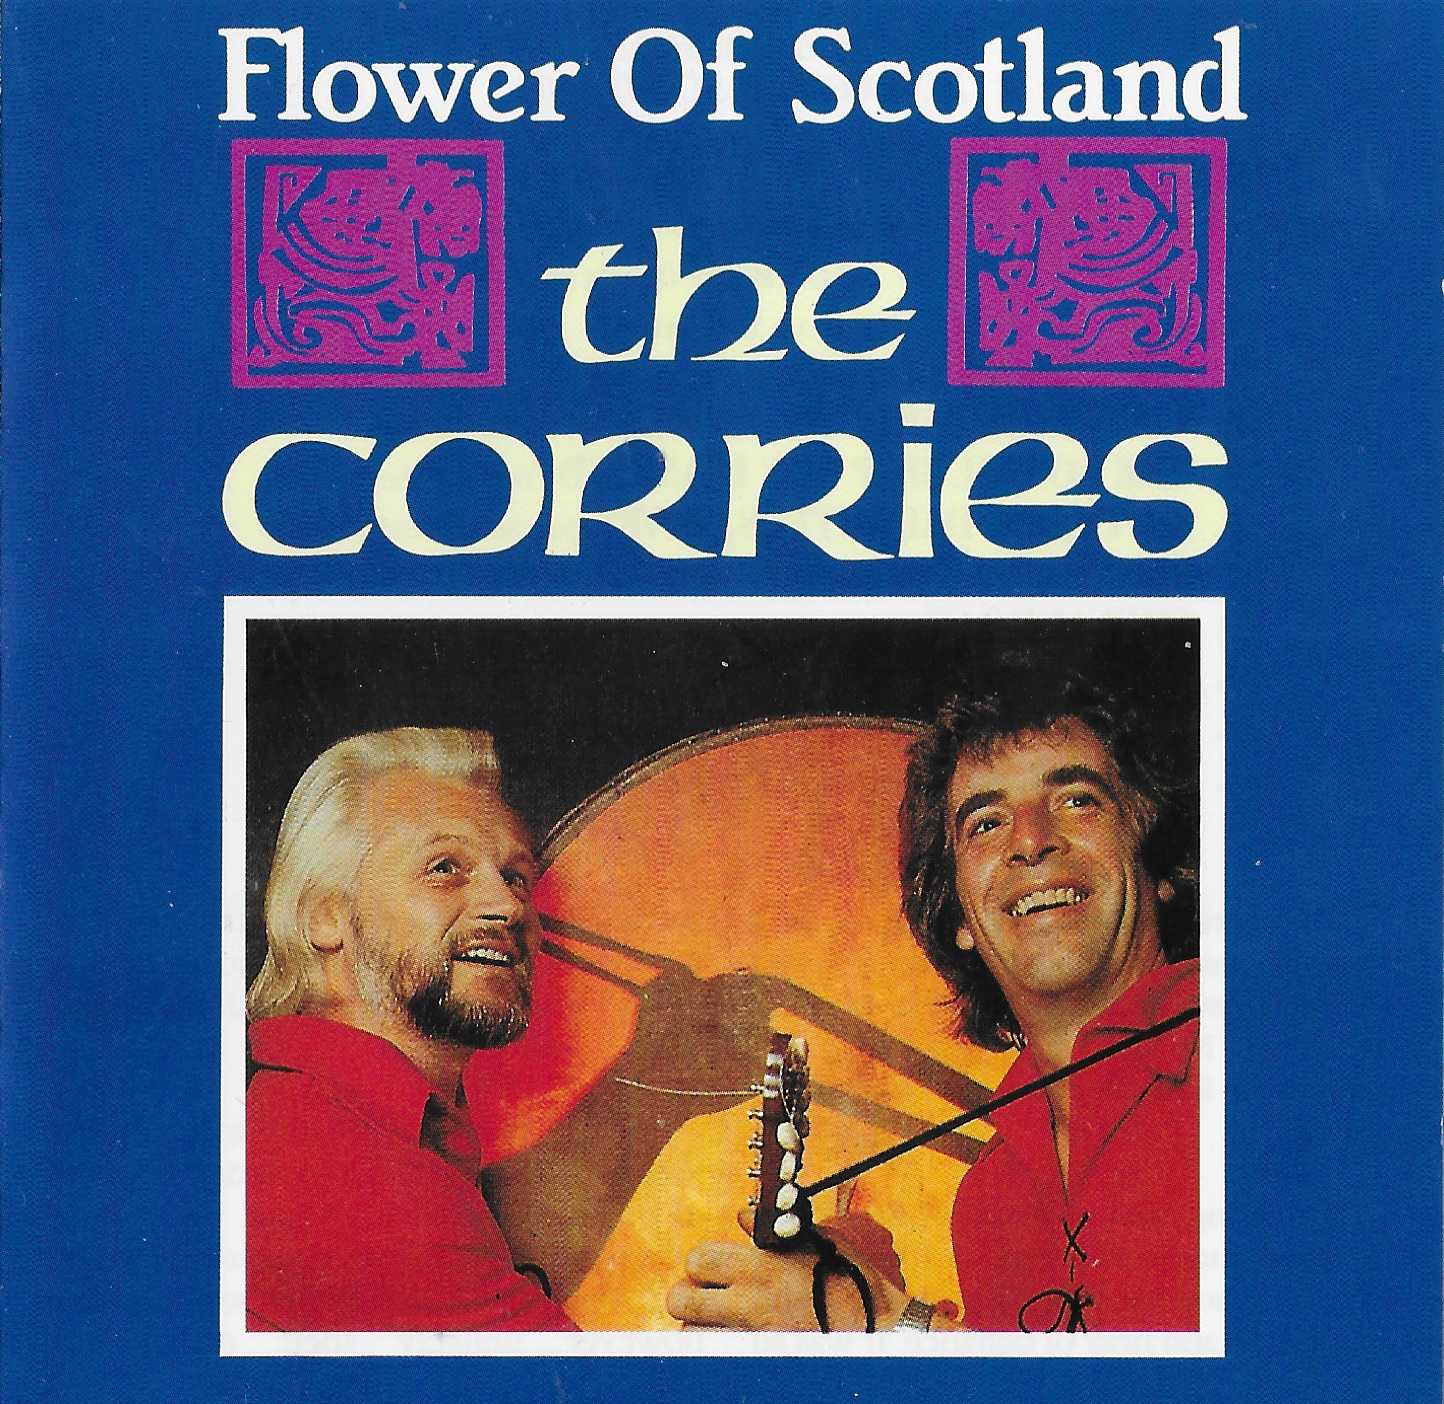 Picture of BBCCD820 Flowers of Scotland by artist The Corries from the BBC cds - Records and Tapes library